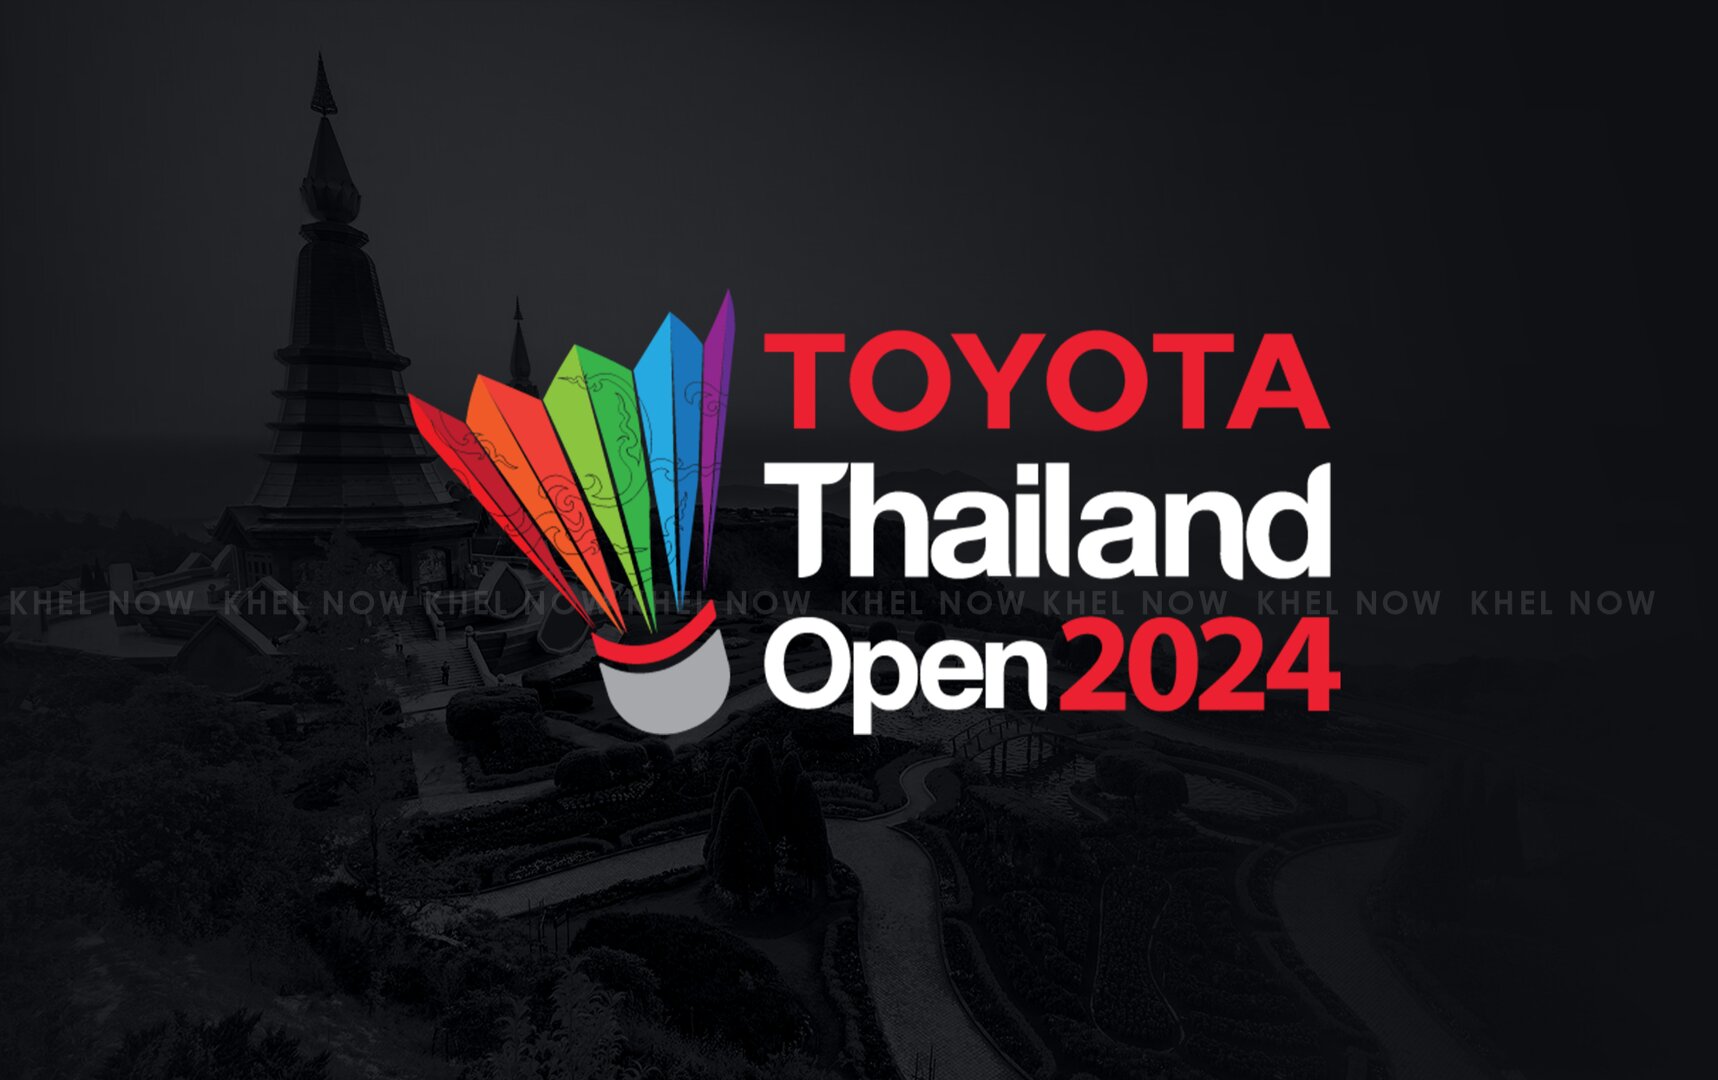 Thailand Open 2024 Live streaming, TV channel, where and how to watch